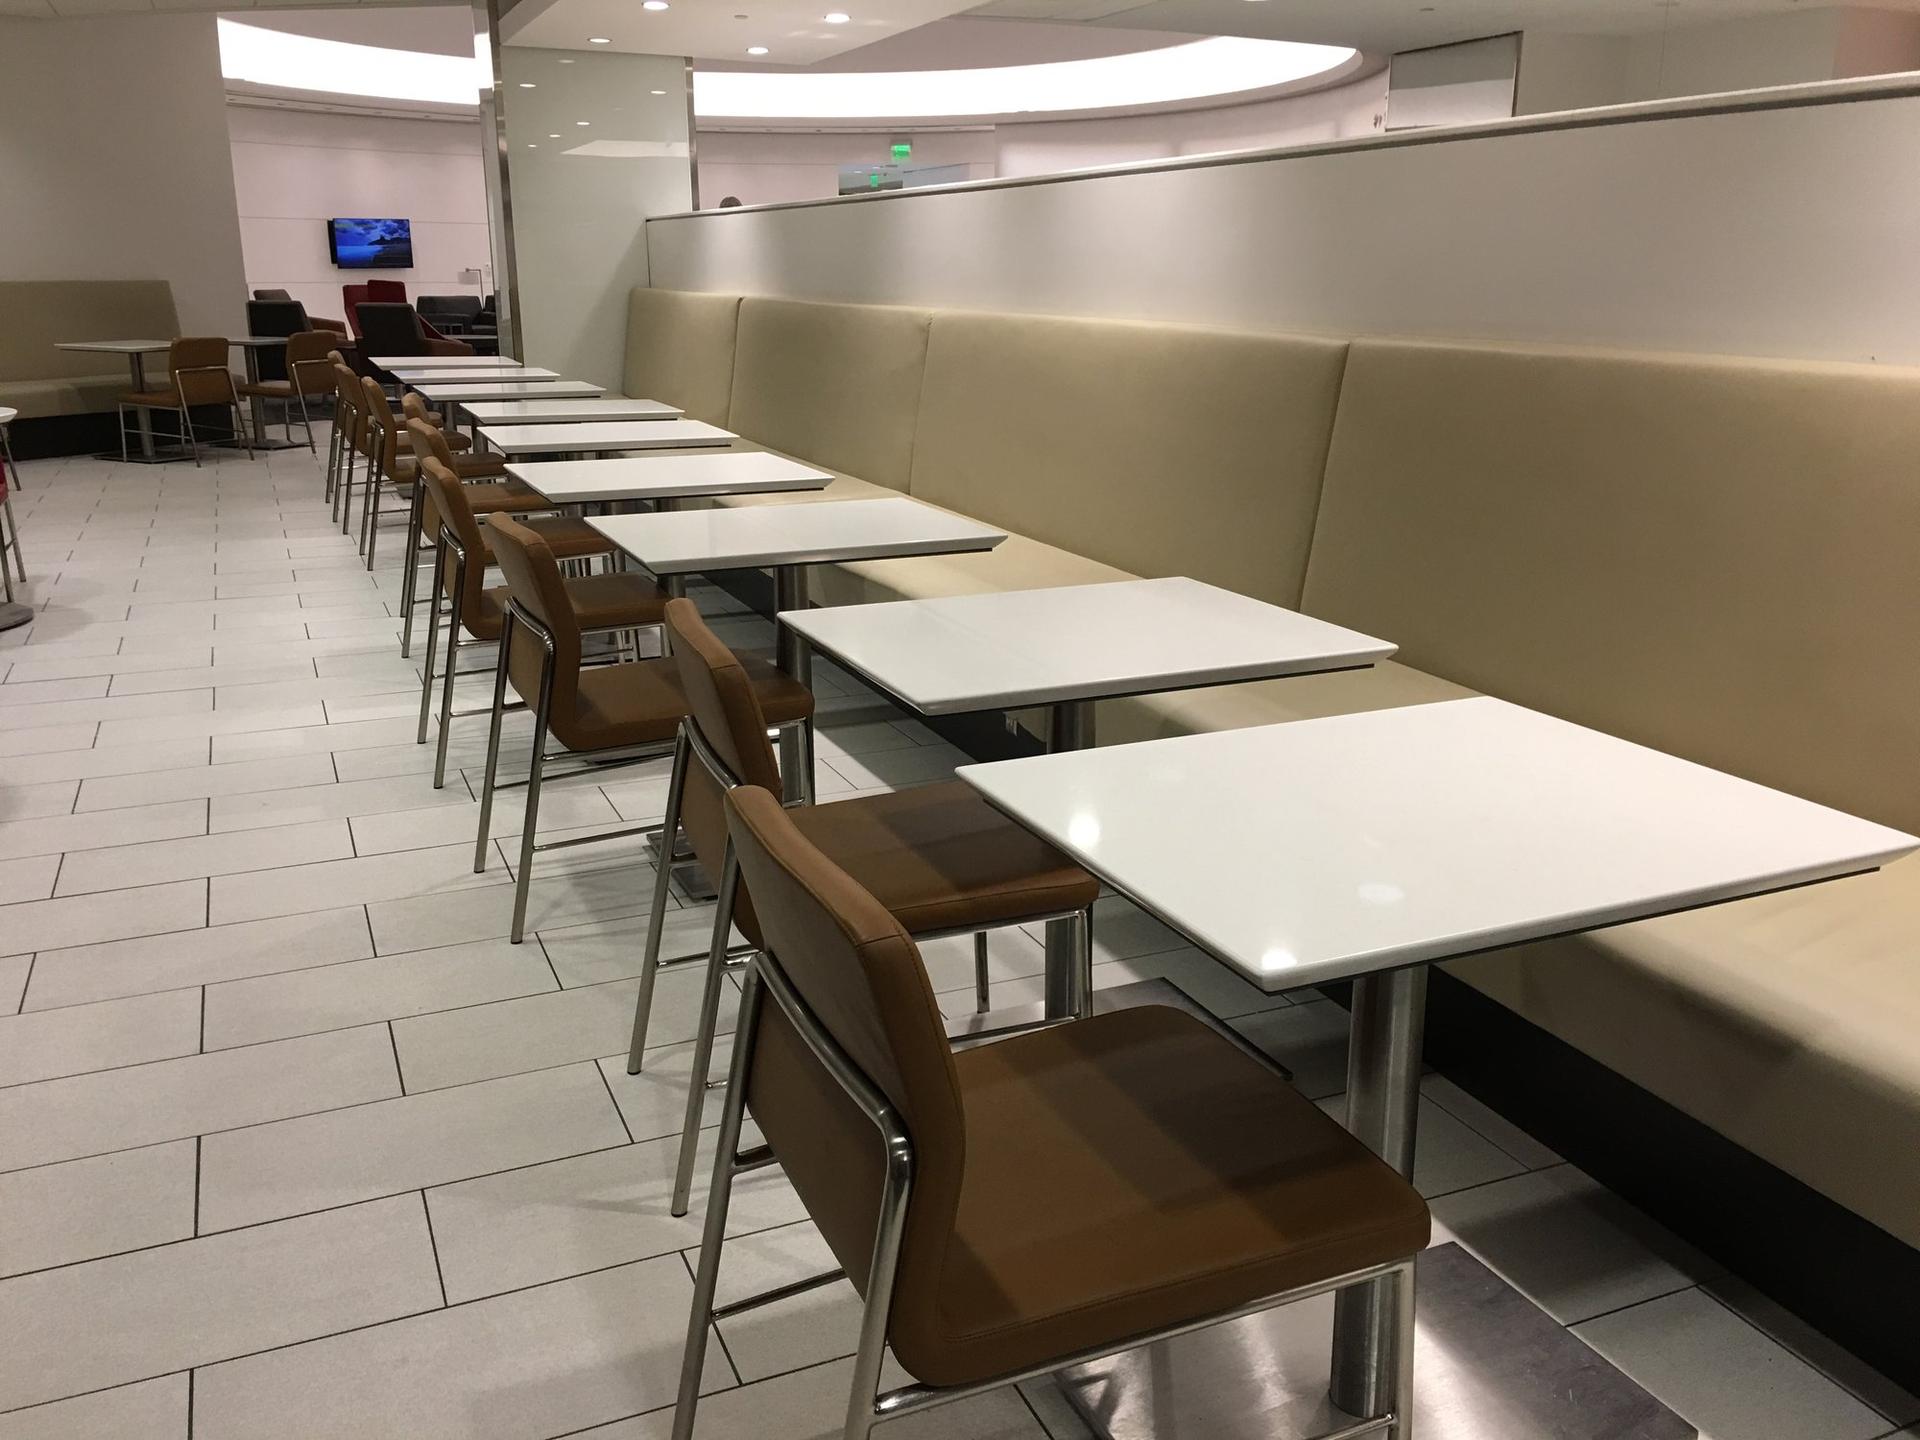 American Airlines Admirals Club image 13 of 38